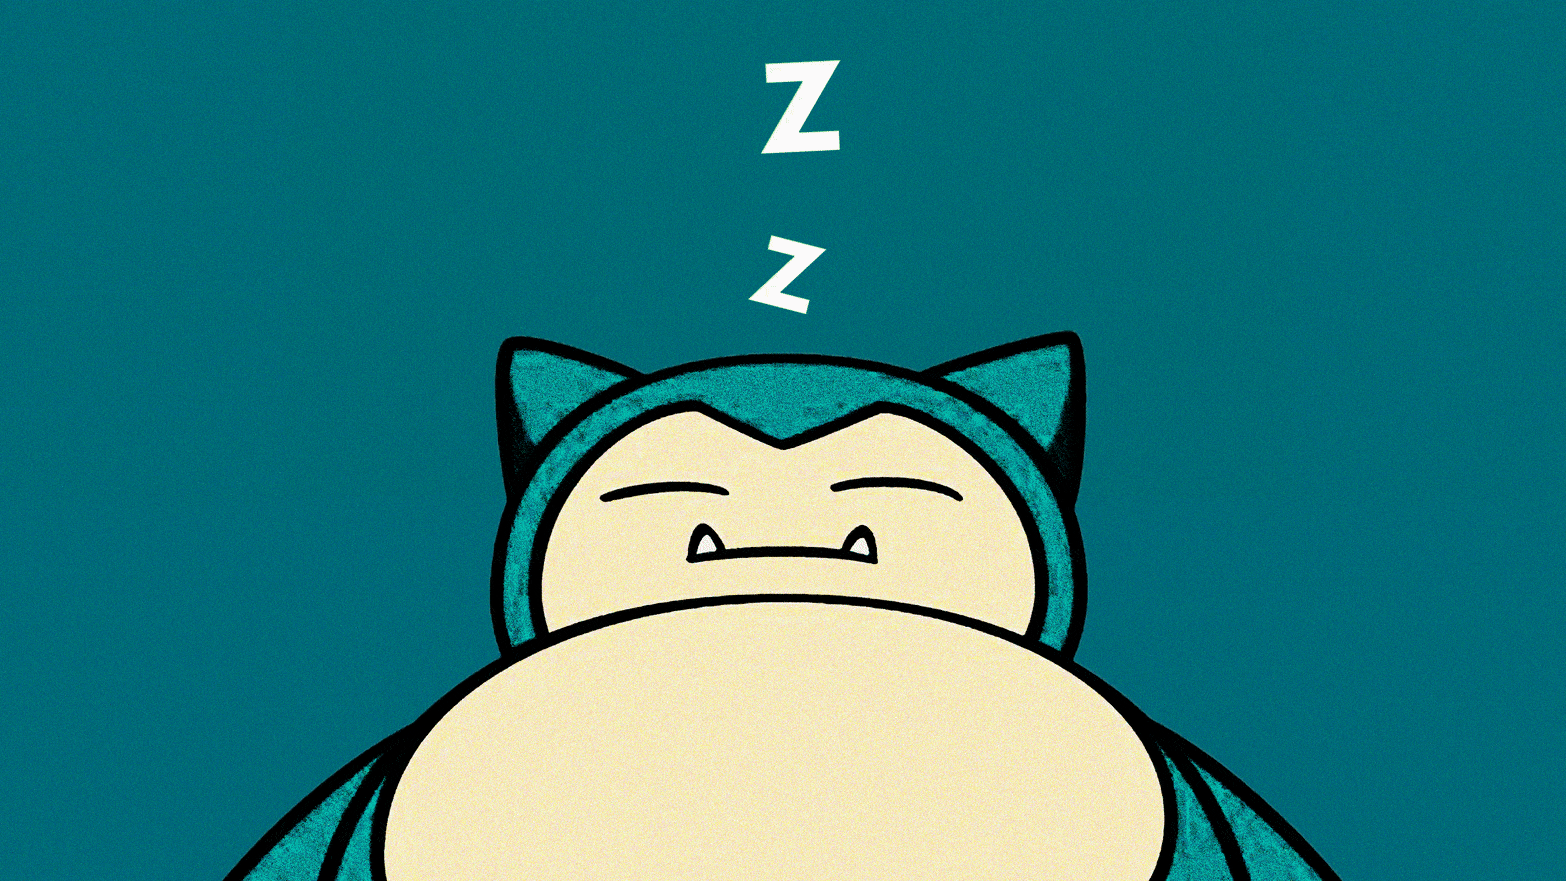 An illustration including photos of the Pokémon Snorlax and Sleeping iconography.